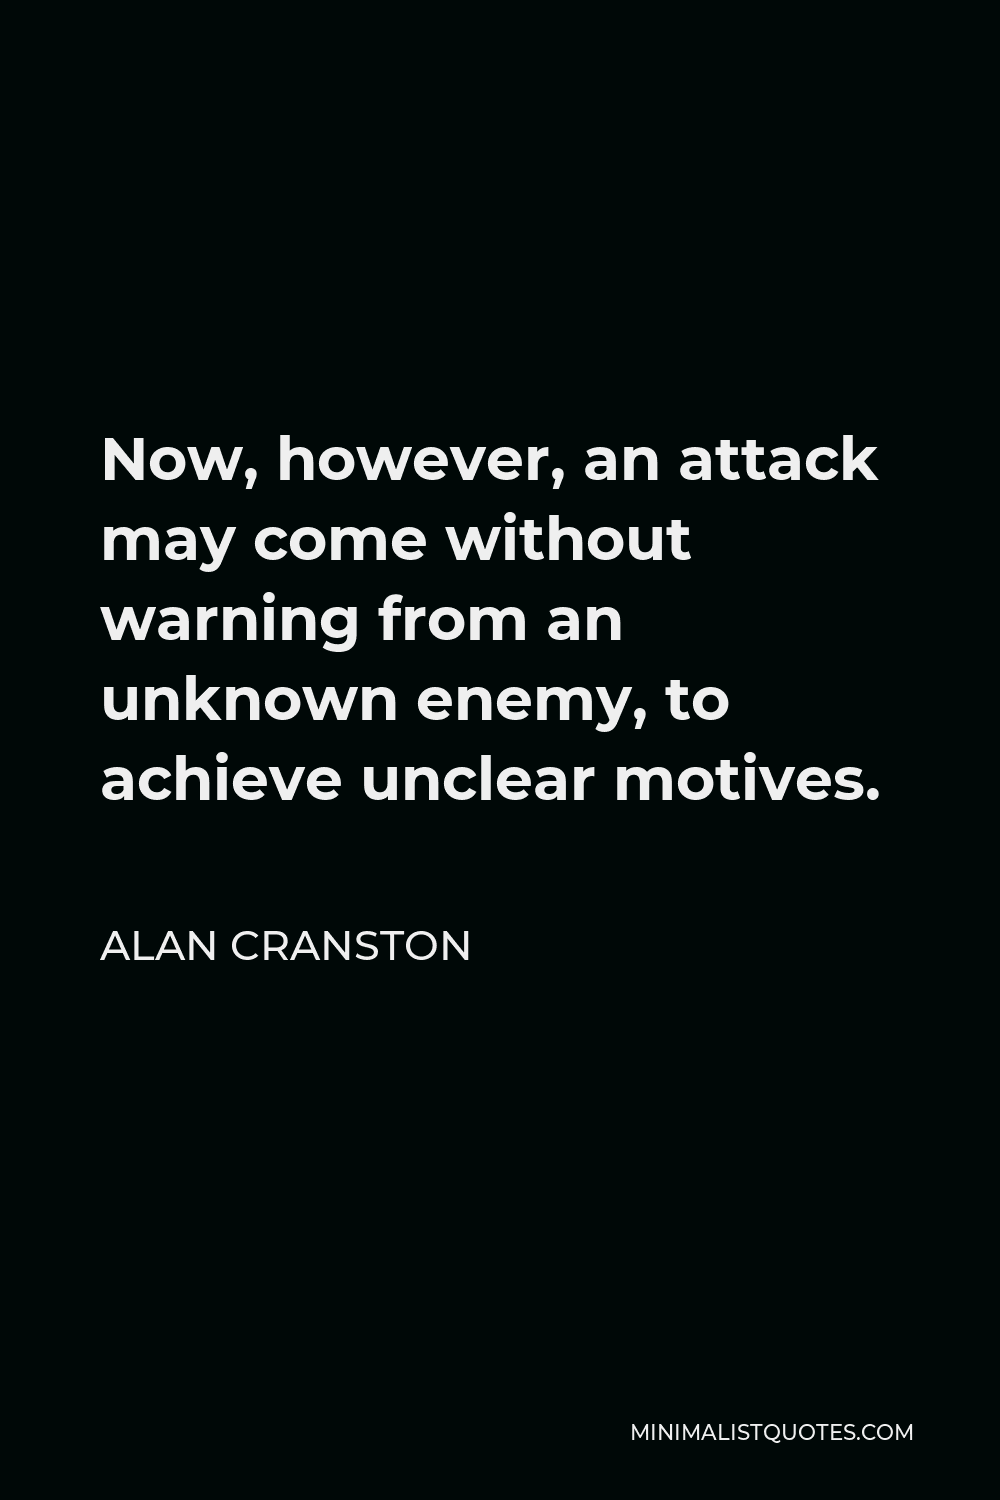 Alan Cranston Quote - Now, however, an attack may come without warning from an unknown enemy, to achieve unclear motives.